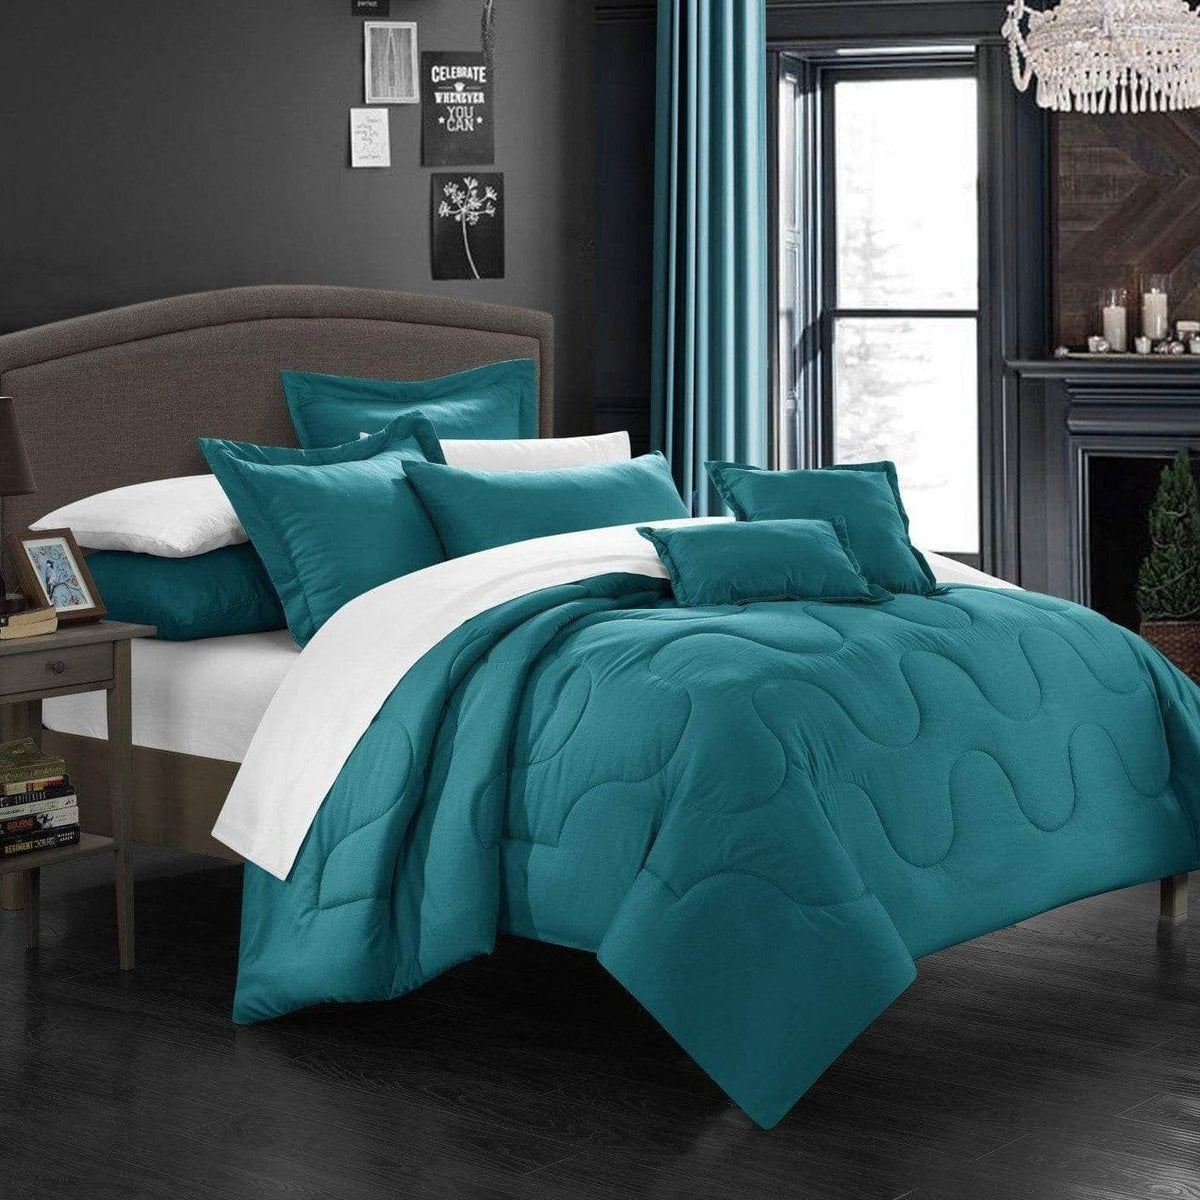 Chic Home Donna 7 Piece Comforter Set Teal